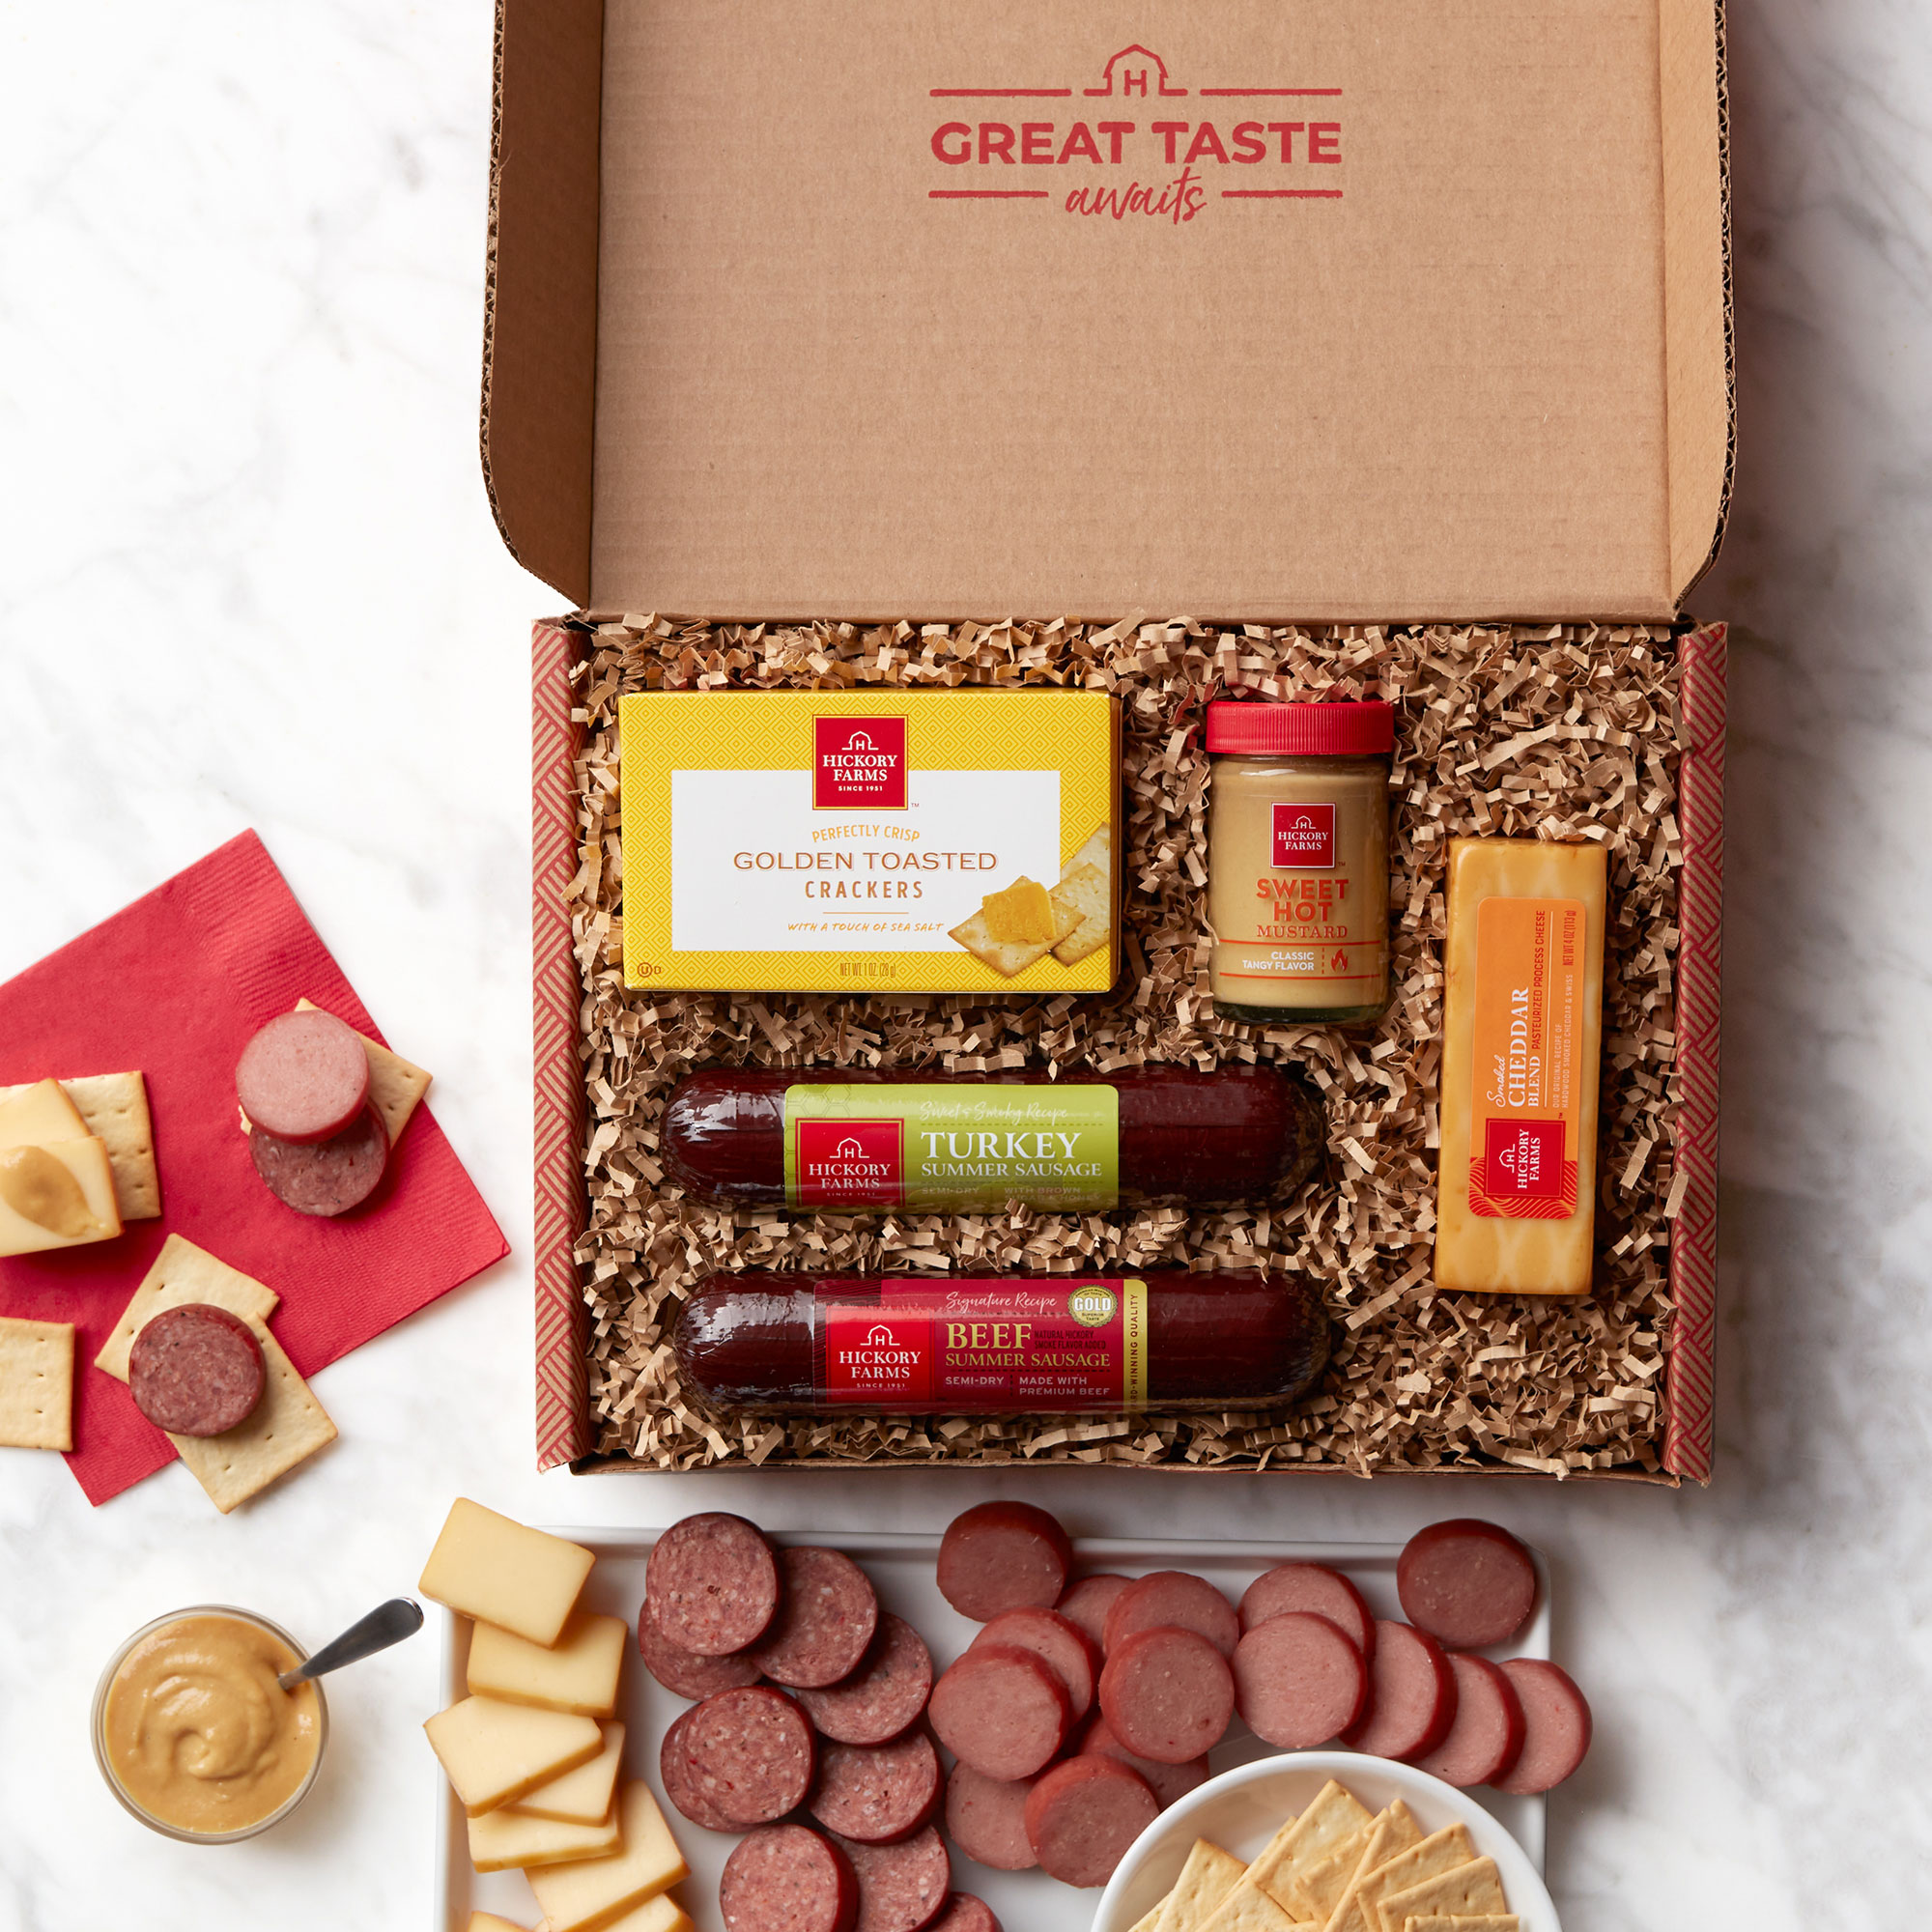 Hickory Farms Sweet & Smoky Turkey Sampler Gift Set bundled with Added  Strawberry Bon Bons, Savory Turkey Summer Sausage, Cheddar Cheeese, and  Honey